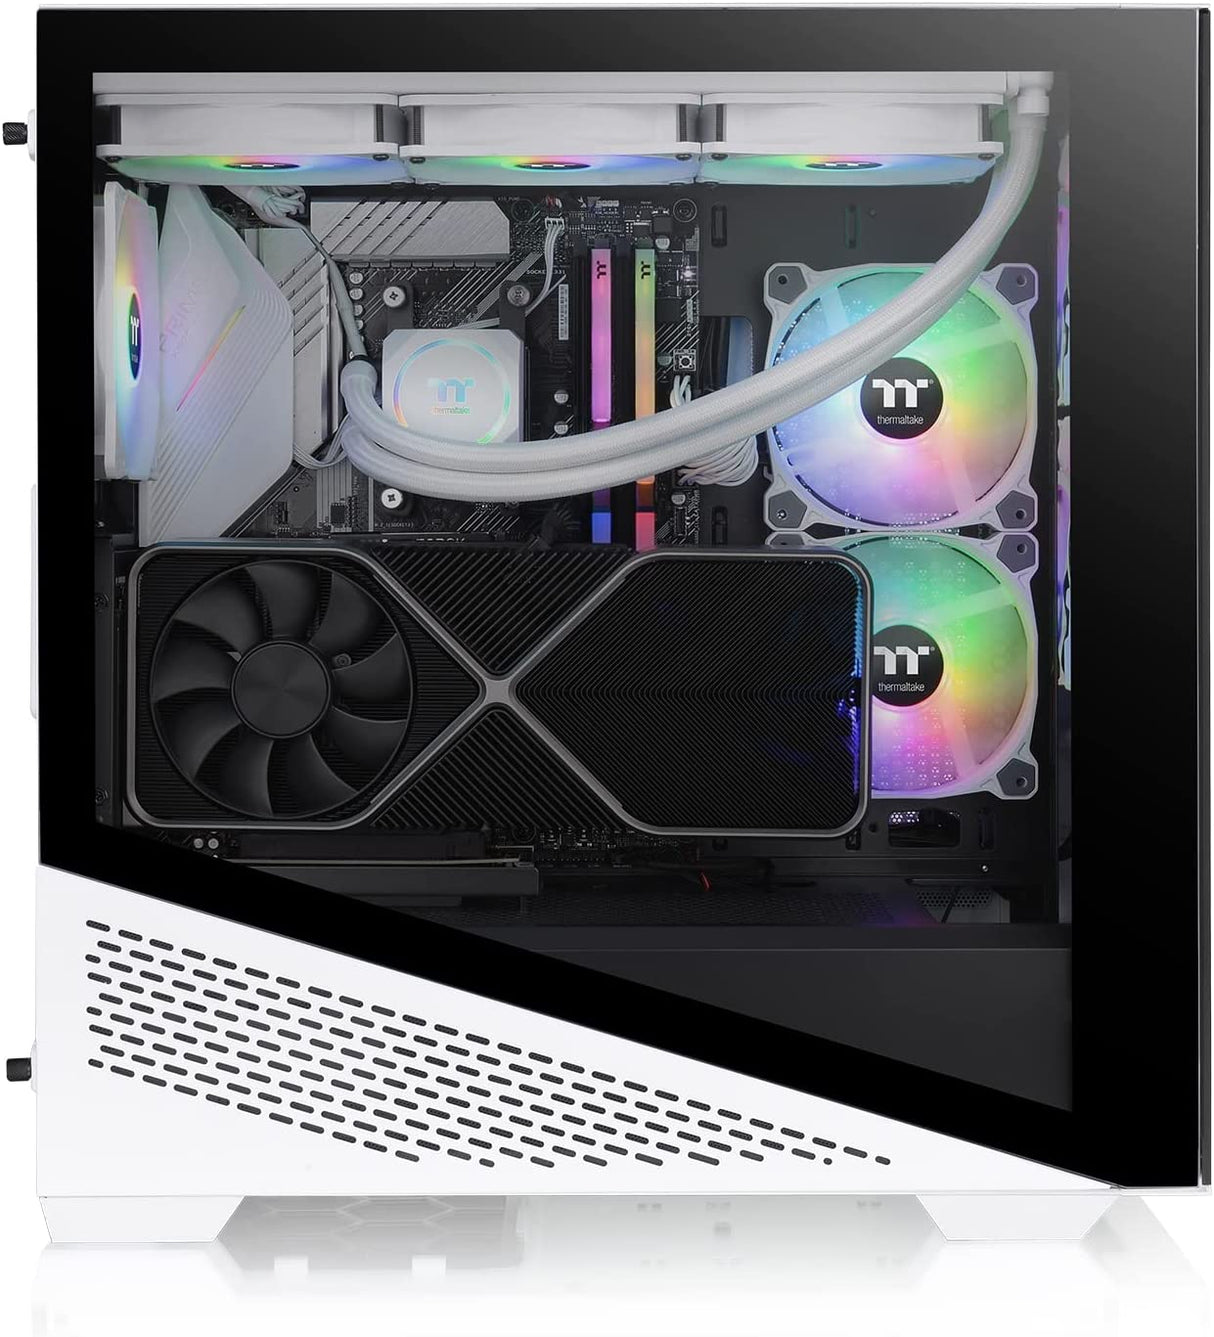 Thermaltake Divider 370 TG ARGB Motherboard Sync E-ATX Mid Tower Computer Case with 3x120mm ARGB Fan Pre-Installed, Tempered Glass Side Panel, Ventilated Front Mesh Panel, CA-1S4-00M6WN-00, White Divider 370 White